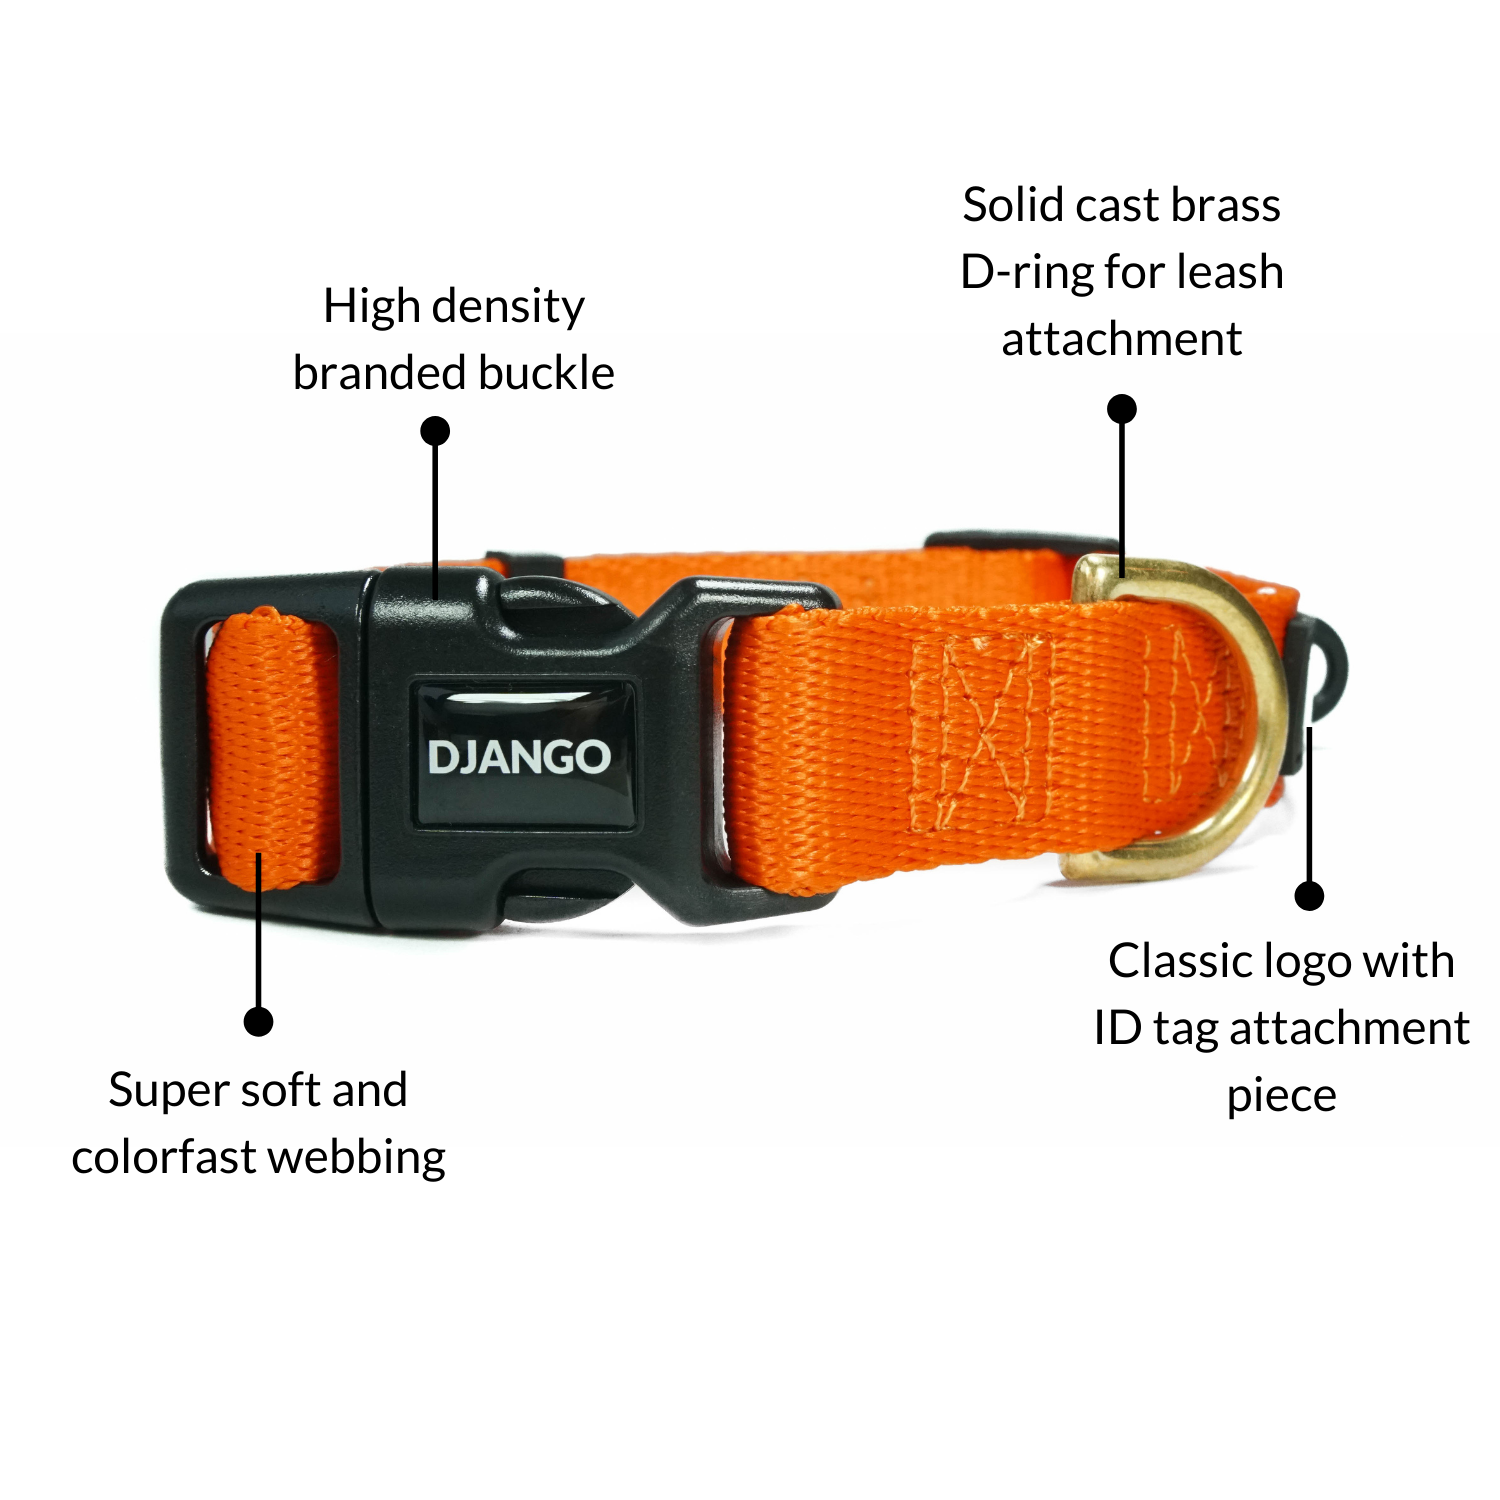 DJANGO Adventure Dog Collar in Sunset Orange - Modern, durable, and stylish collar for small and medium dogs and puppies with solid cast brass hardware - djangobrand.comDJANGO Adventure Dog Collar in Sunset Orange - Modern, durable, and stylish collar for small and medium dogs and puppies with solid cast brass hardware - djangobrand.com